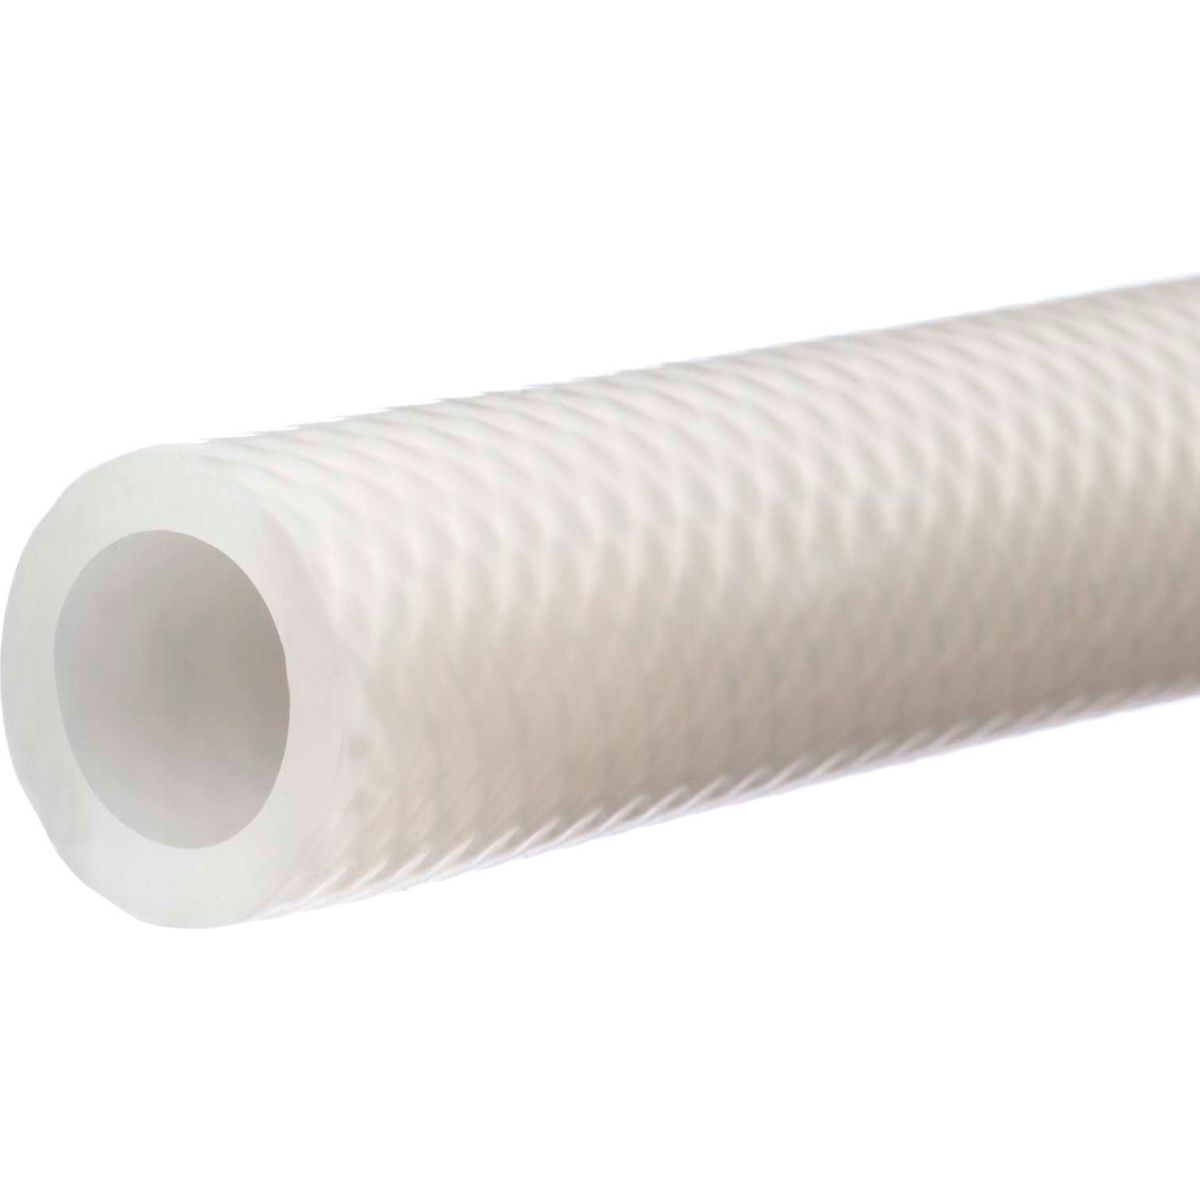 HOME IMPROVEMENT 1 in. ID x 1.37 in. OD x 5 ft. Reinforced High Pressure FDA Silicone Tubing